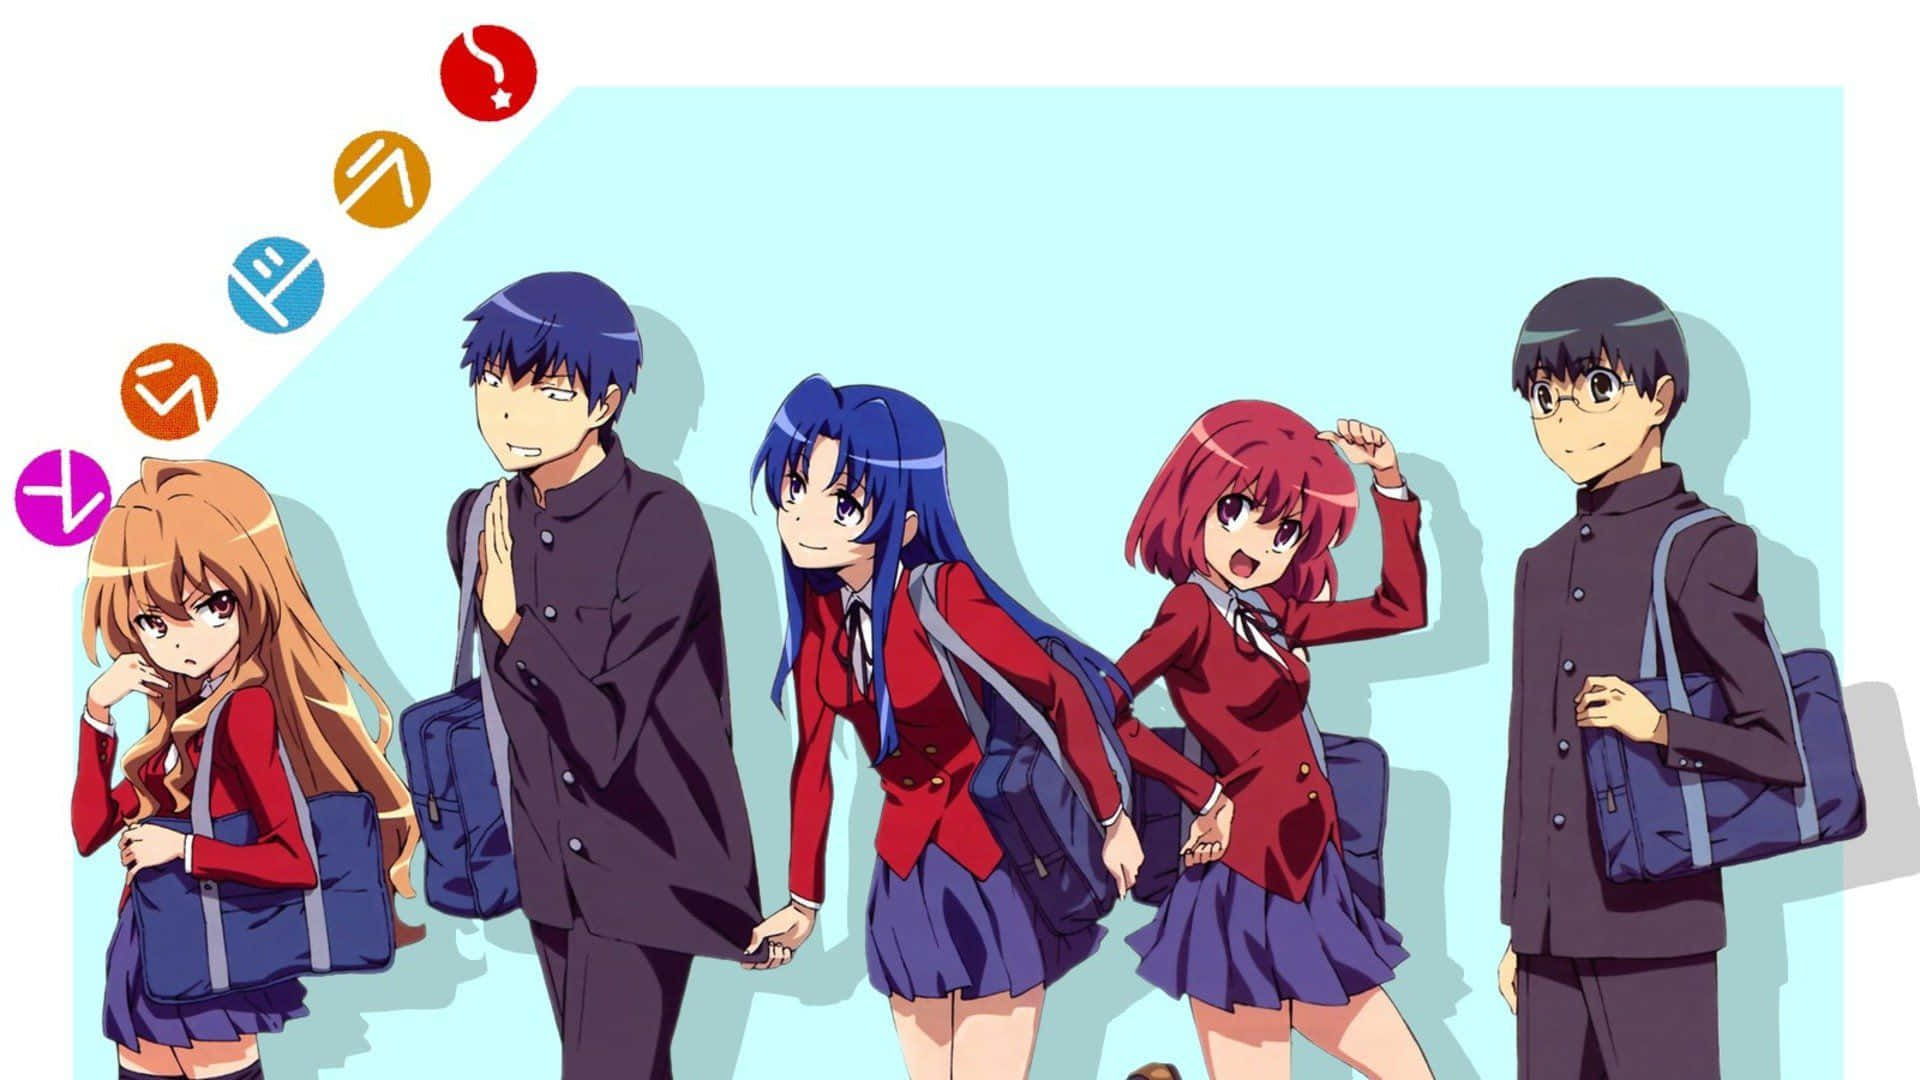 A Group Of Anime Characters With Backpacks And Bags